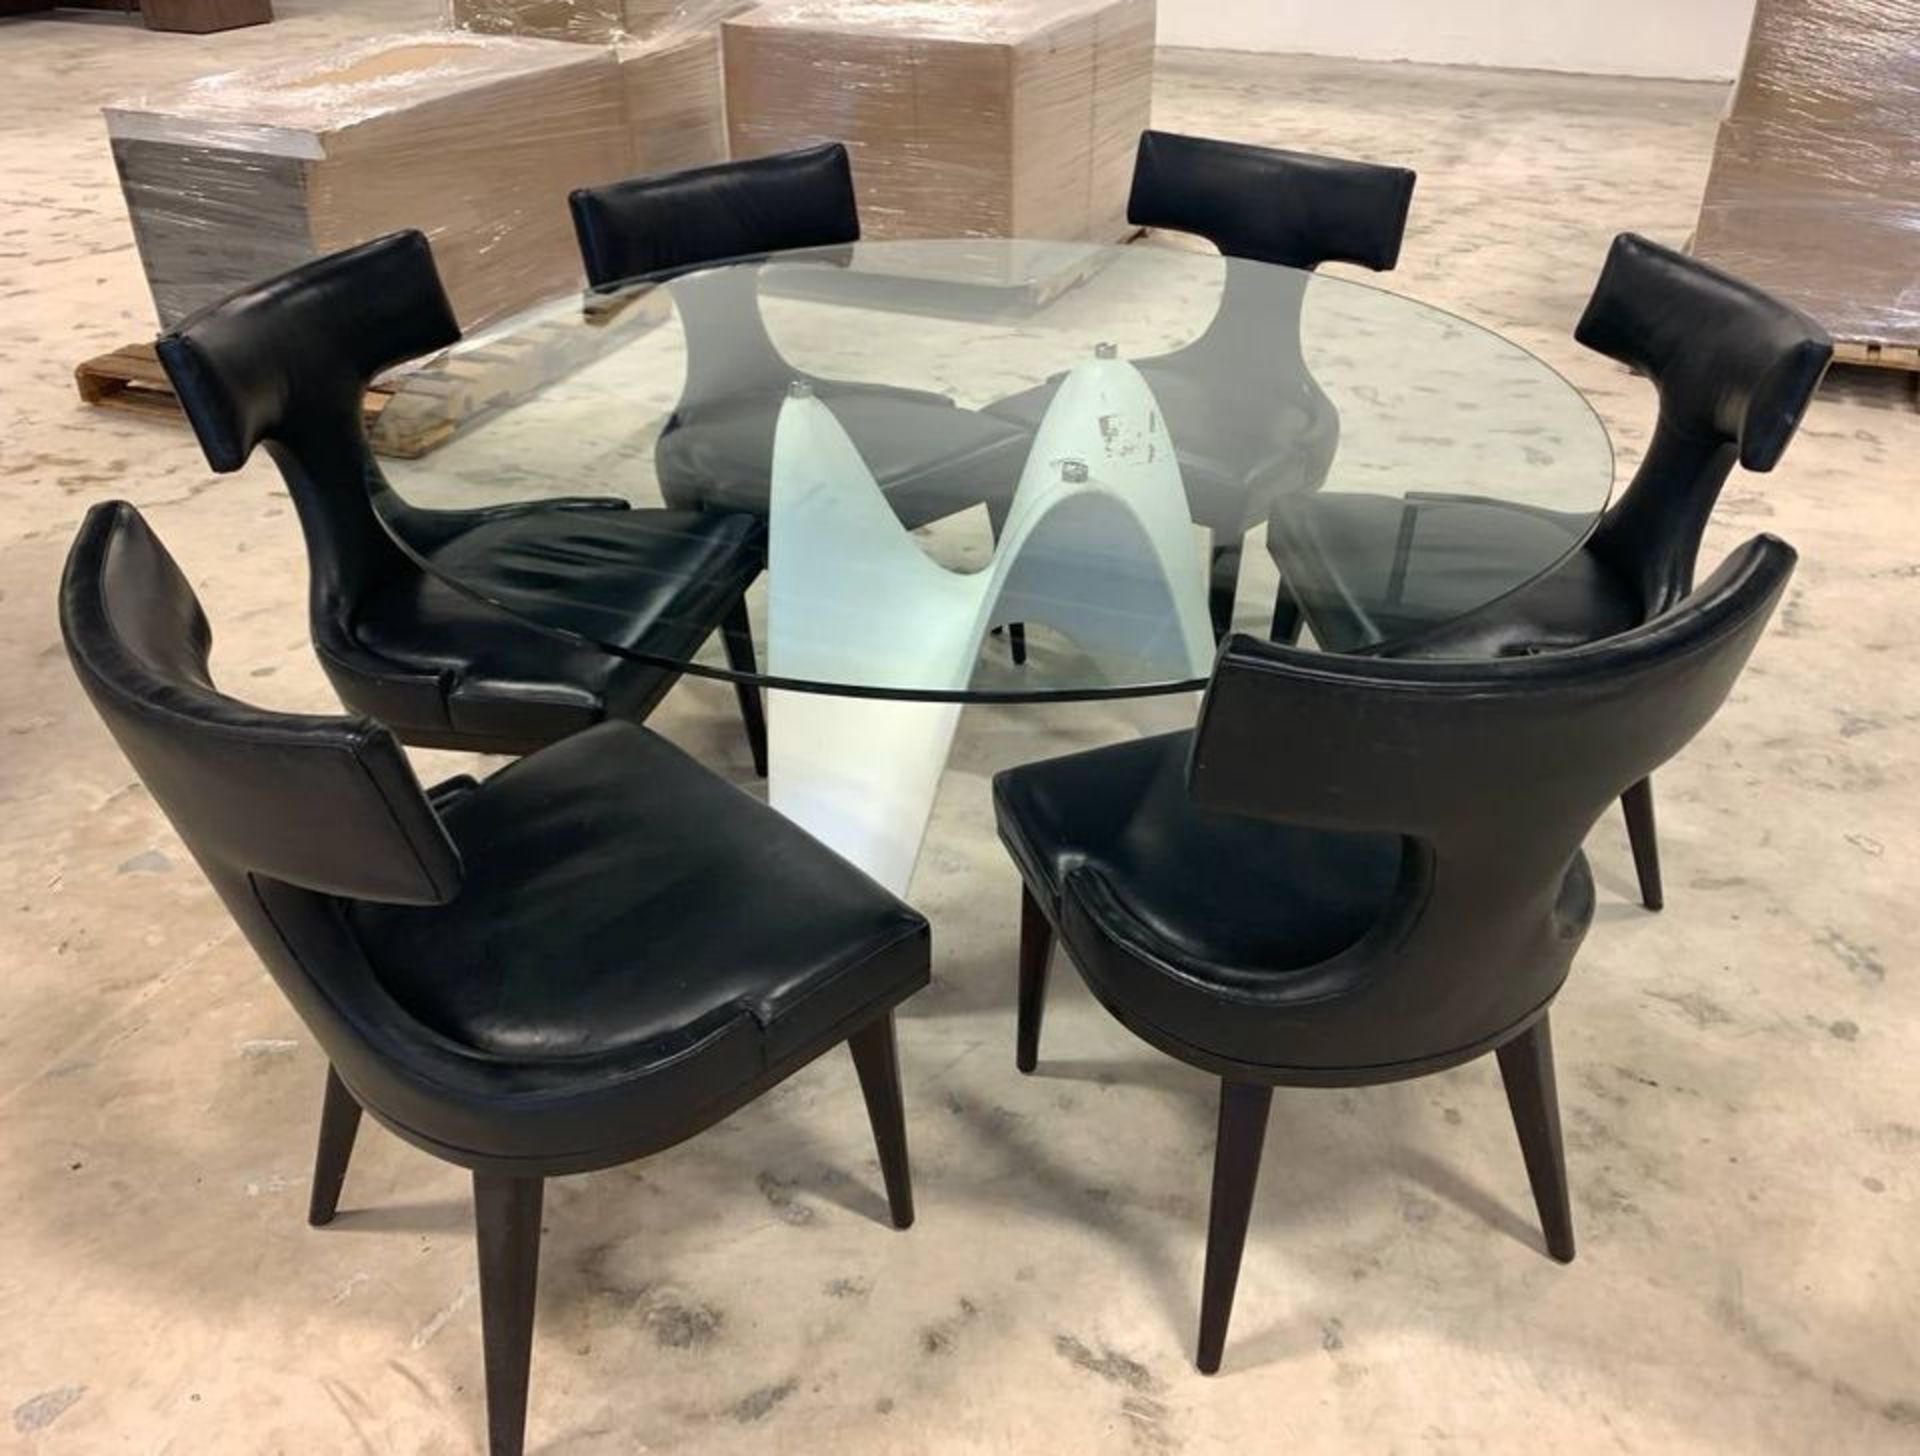 6 SEAT DINNING / GAME TABLE MODERN GLASS TOP